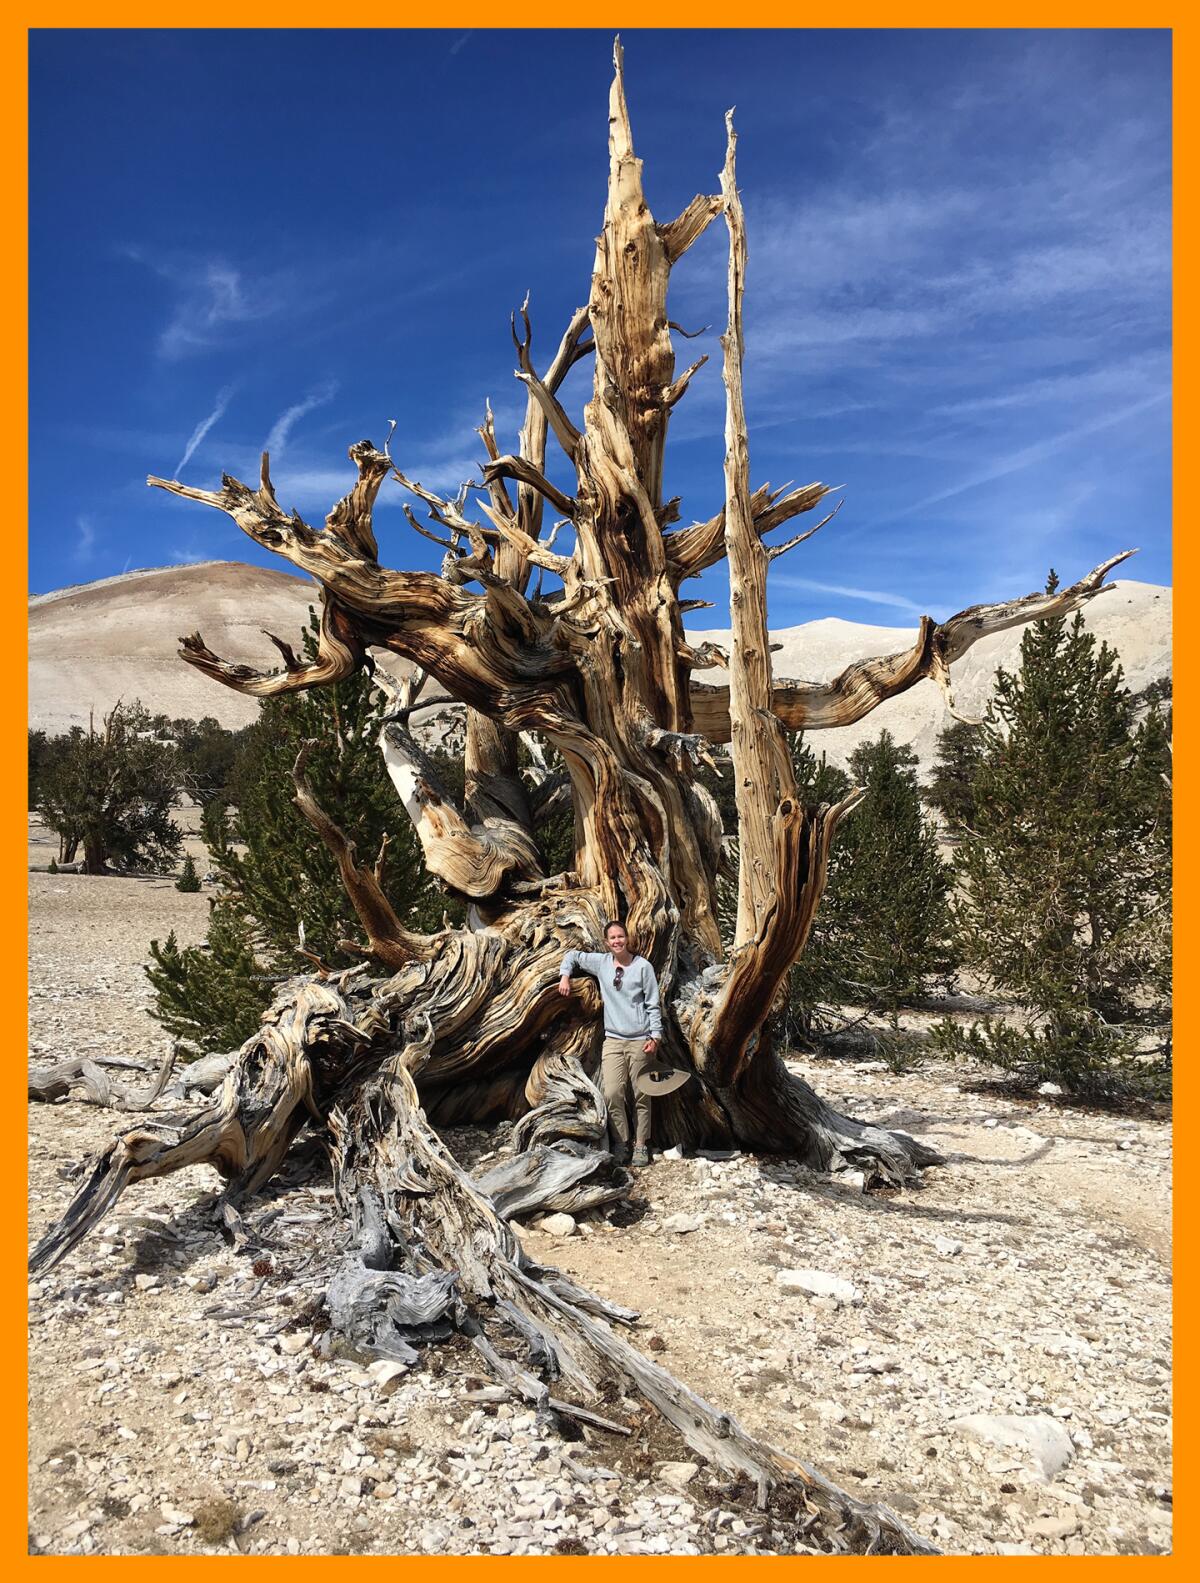 A person stands by a large bristlecone pine tree, with blue sky and mountains in the background